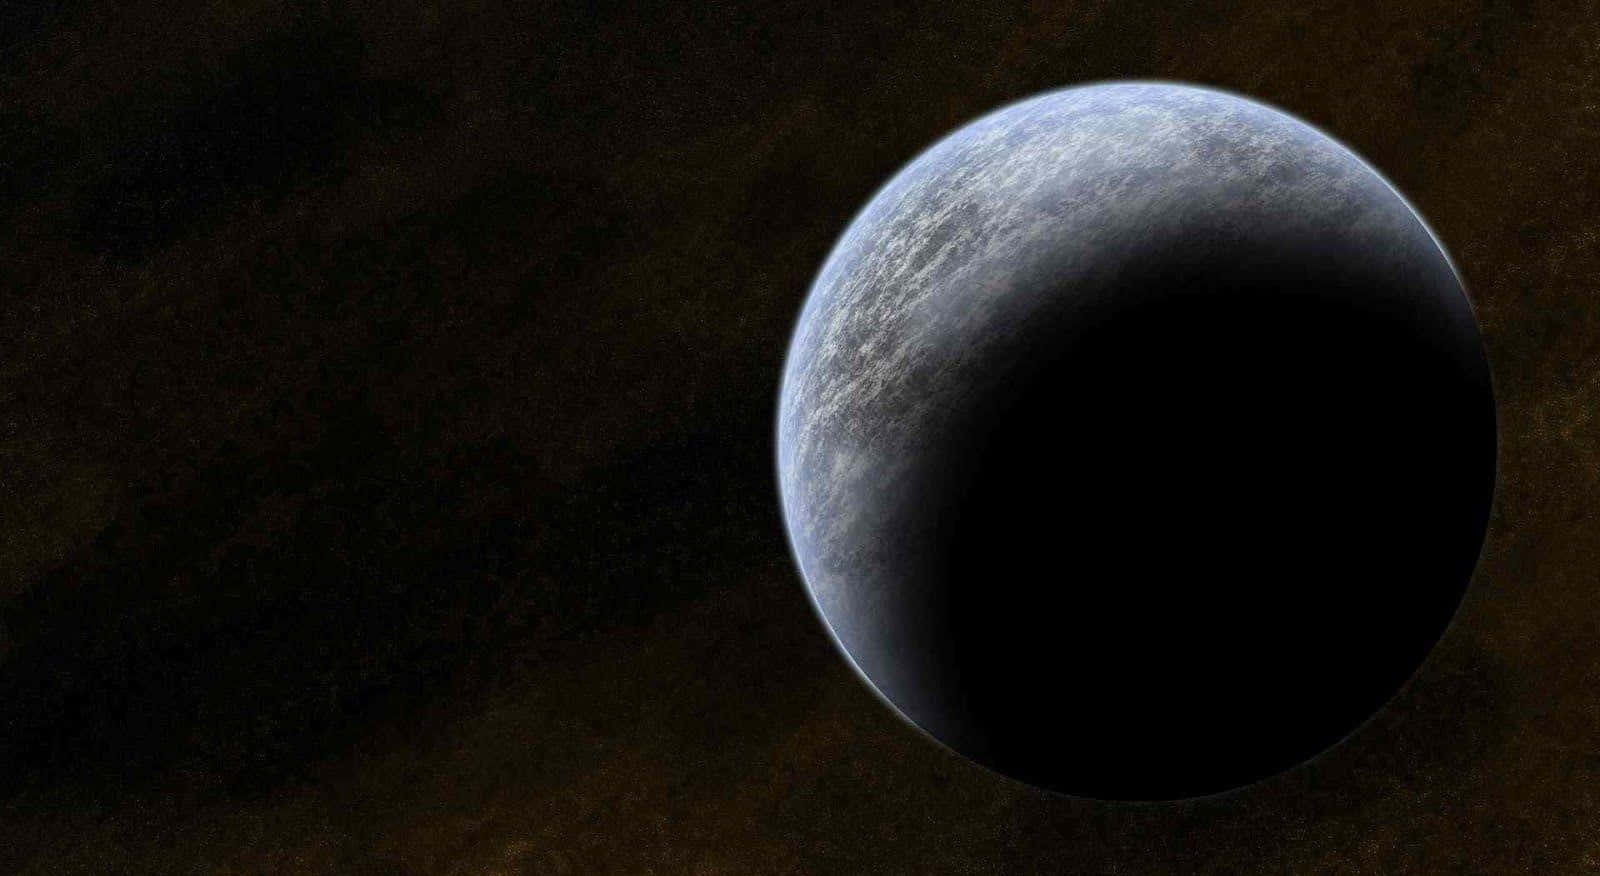 Image  A close-up of the dwarf planet described as the most distant world in our Solar System